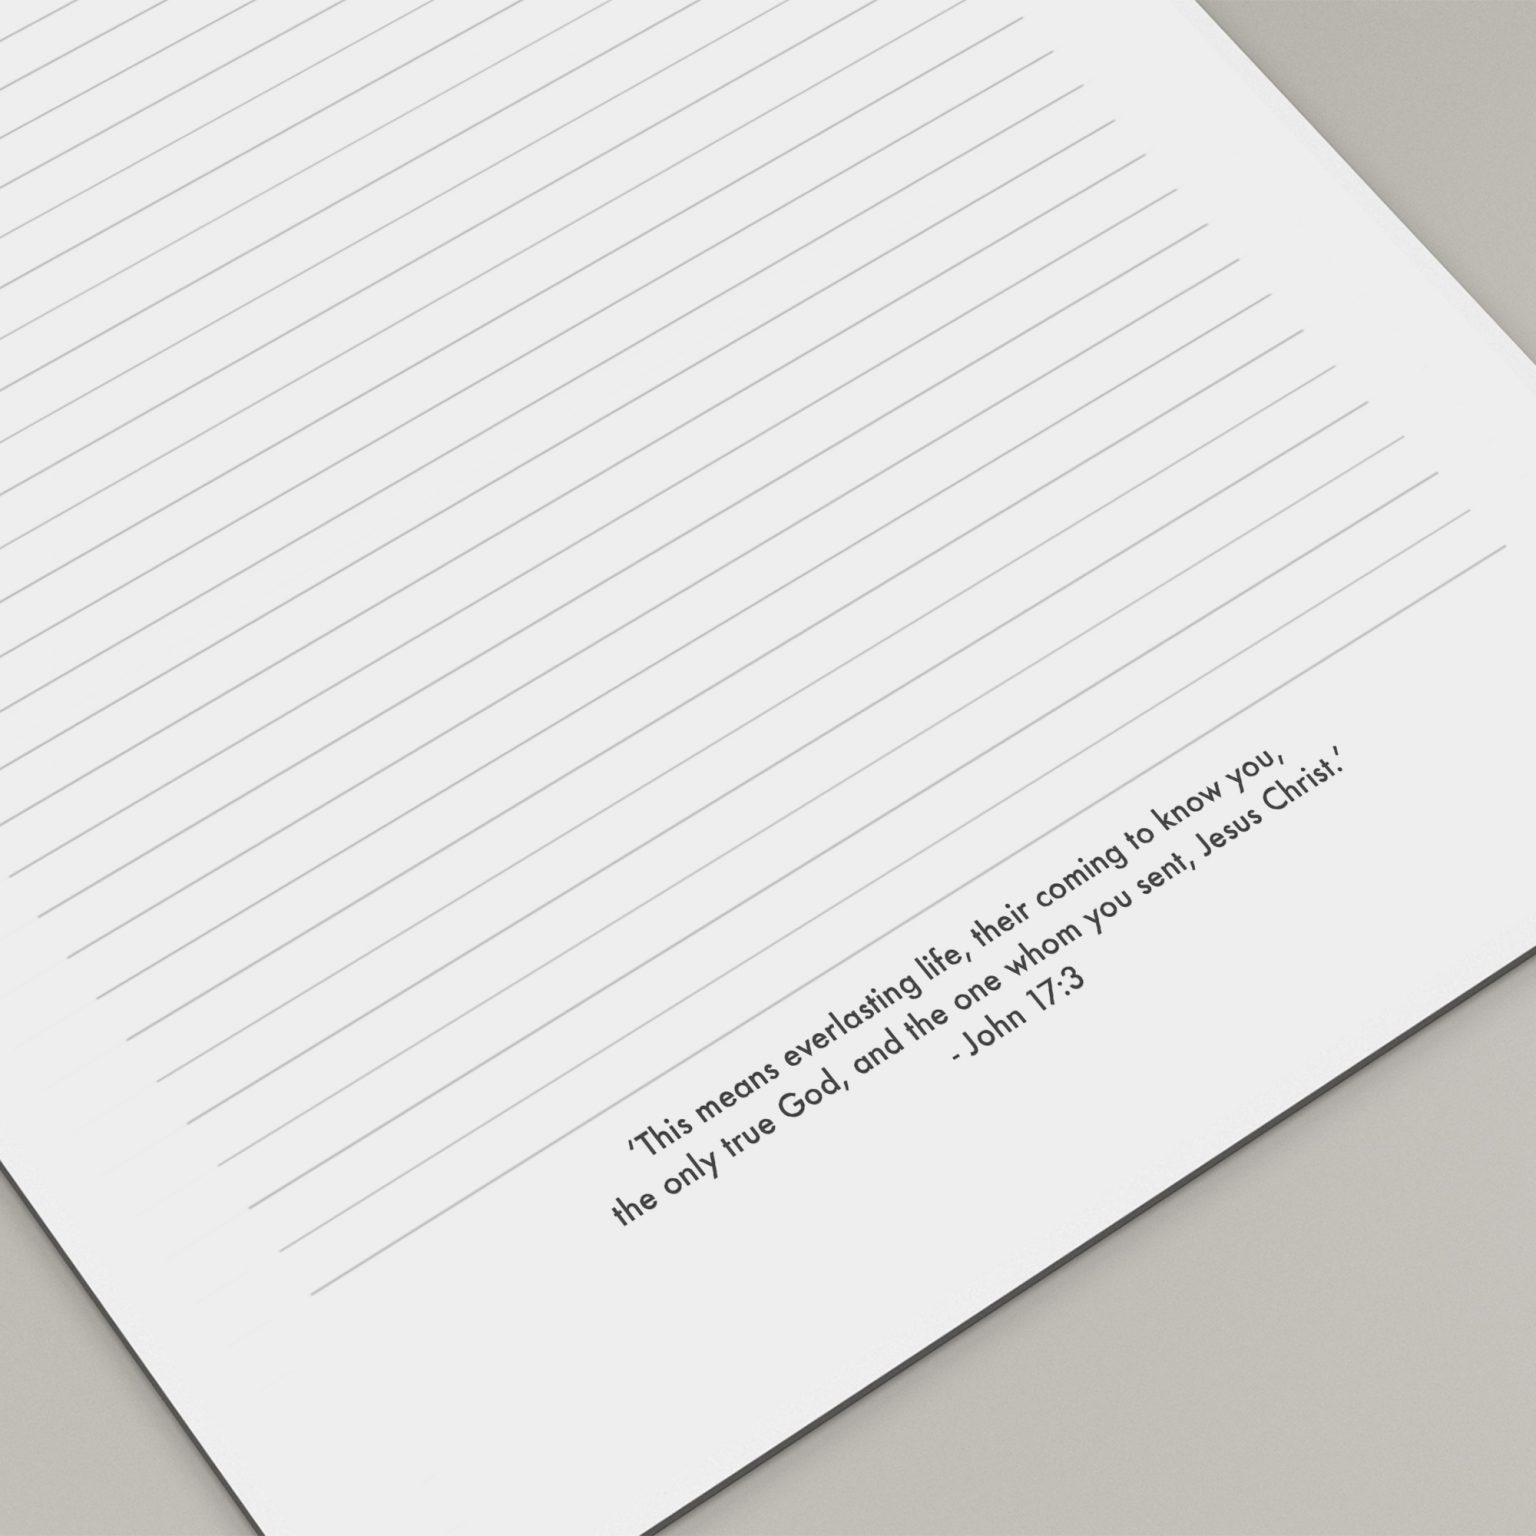 JW letter writing paper template set of 4 featuring encouraging